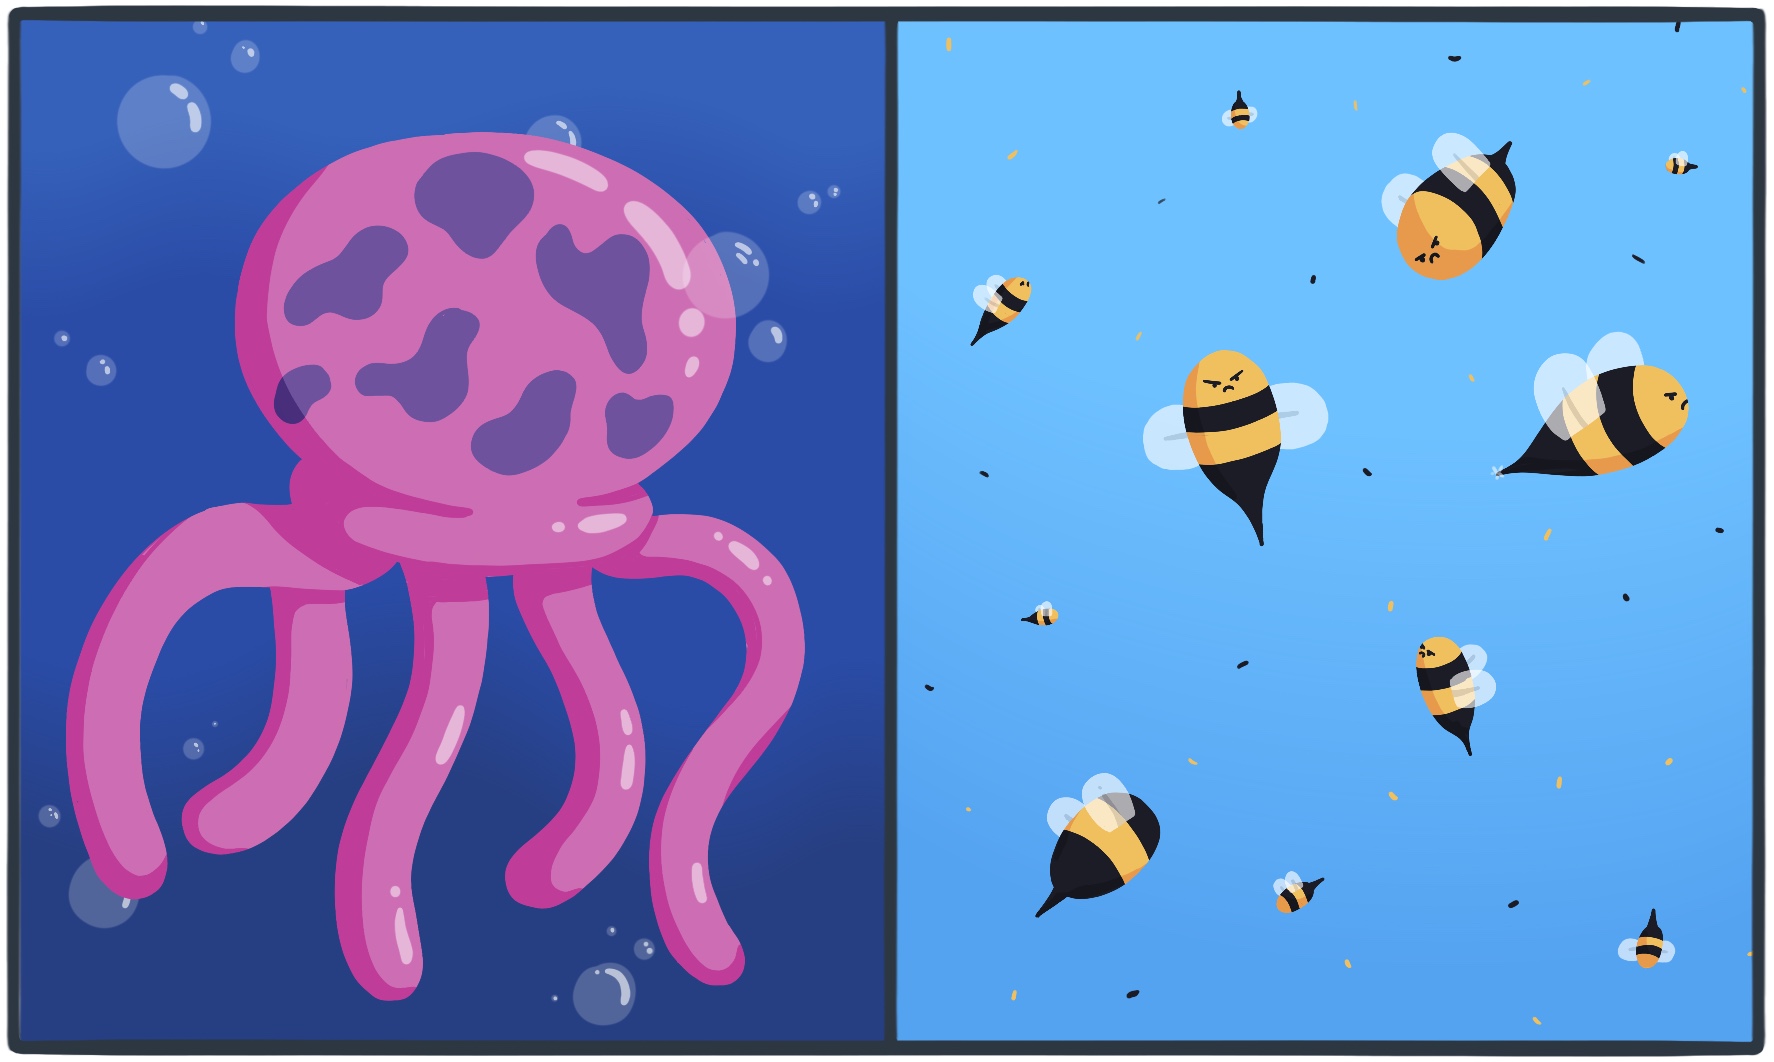 A pink jellyfish on the left and some angry bees on the right